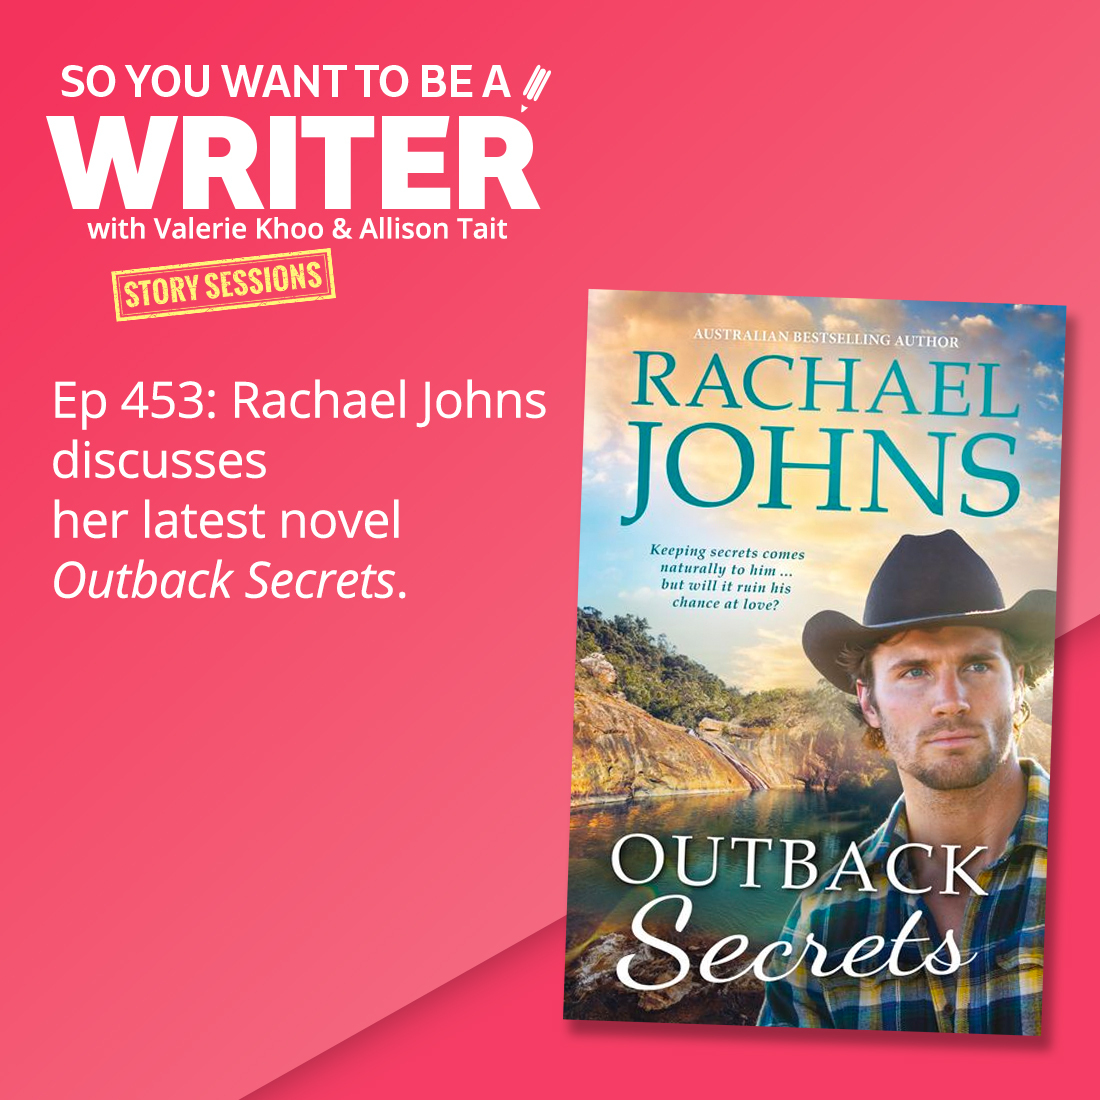 WRITER 453: Rachael Johns discusses her latest novel 'Outback Secrets' [Story Sessions series]